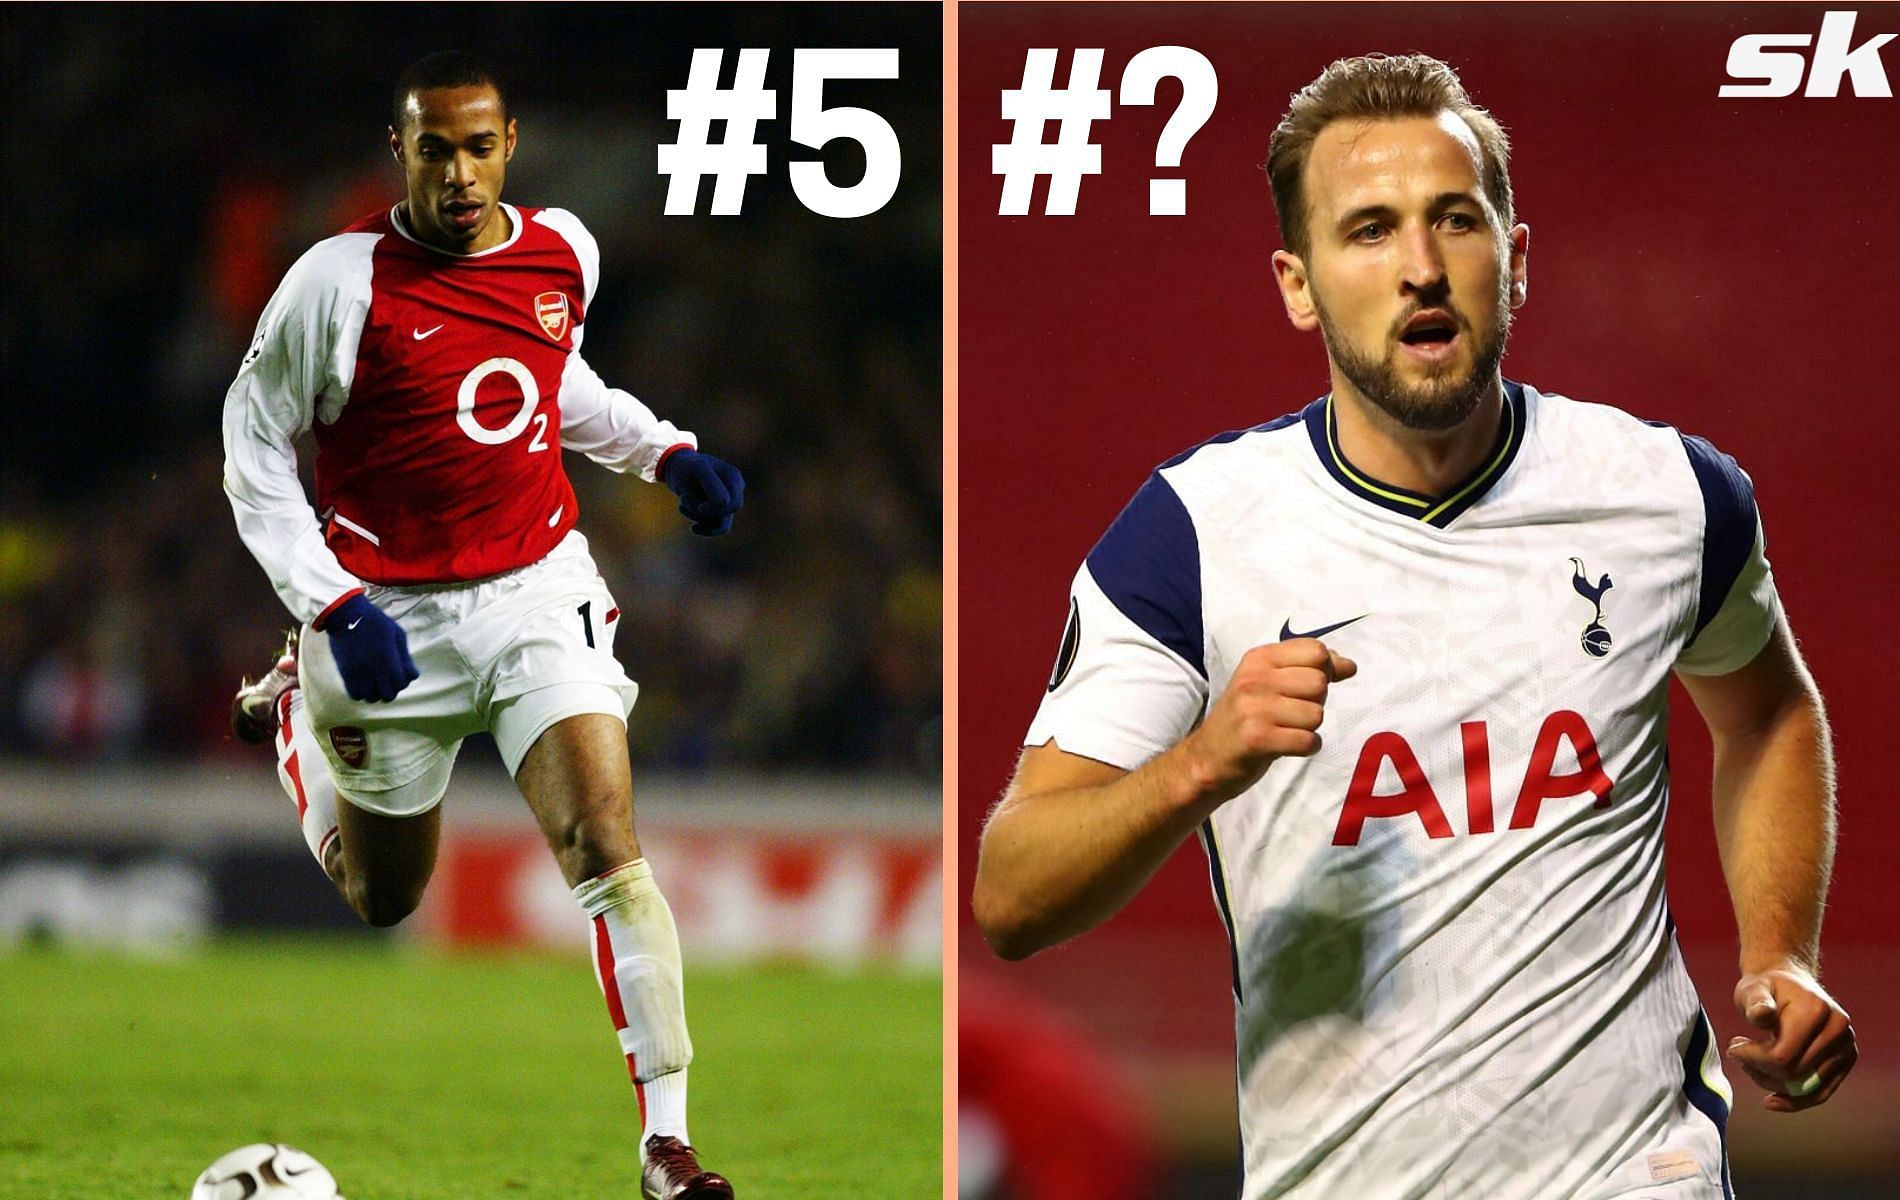 Harry Kane earned the top spot after his goal this year